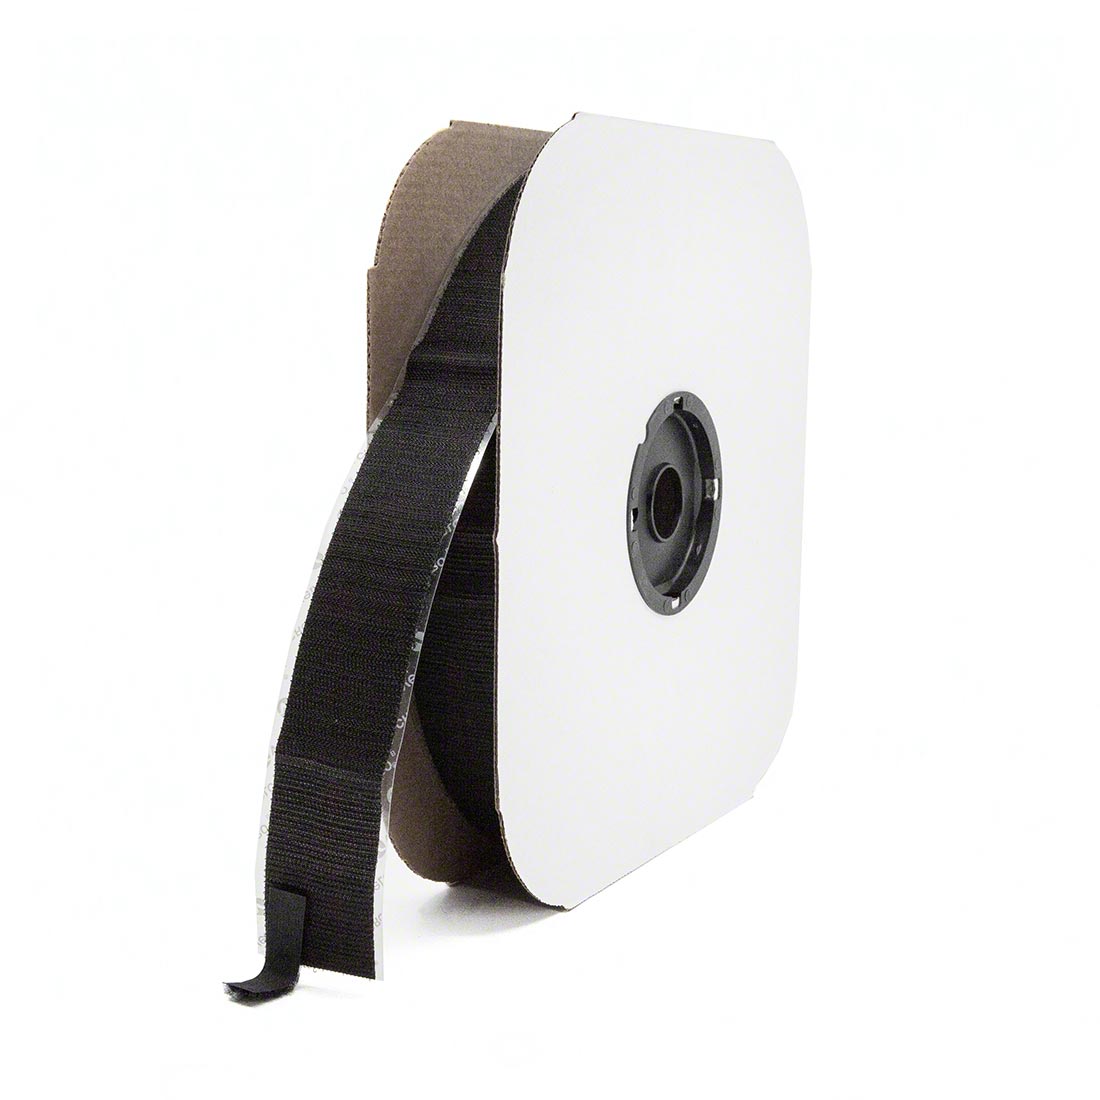 Velcro Tape, Double Sided Tape